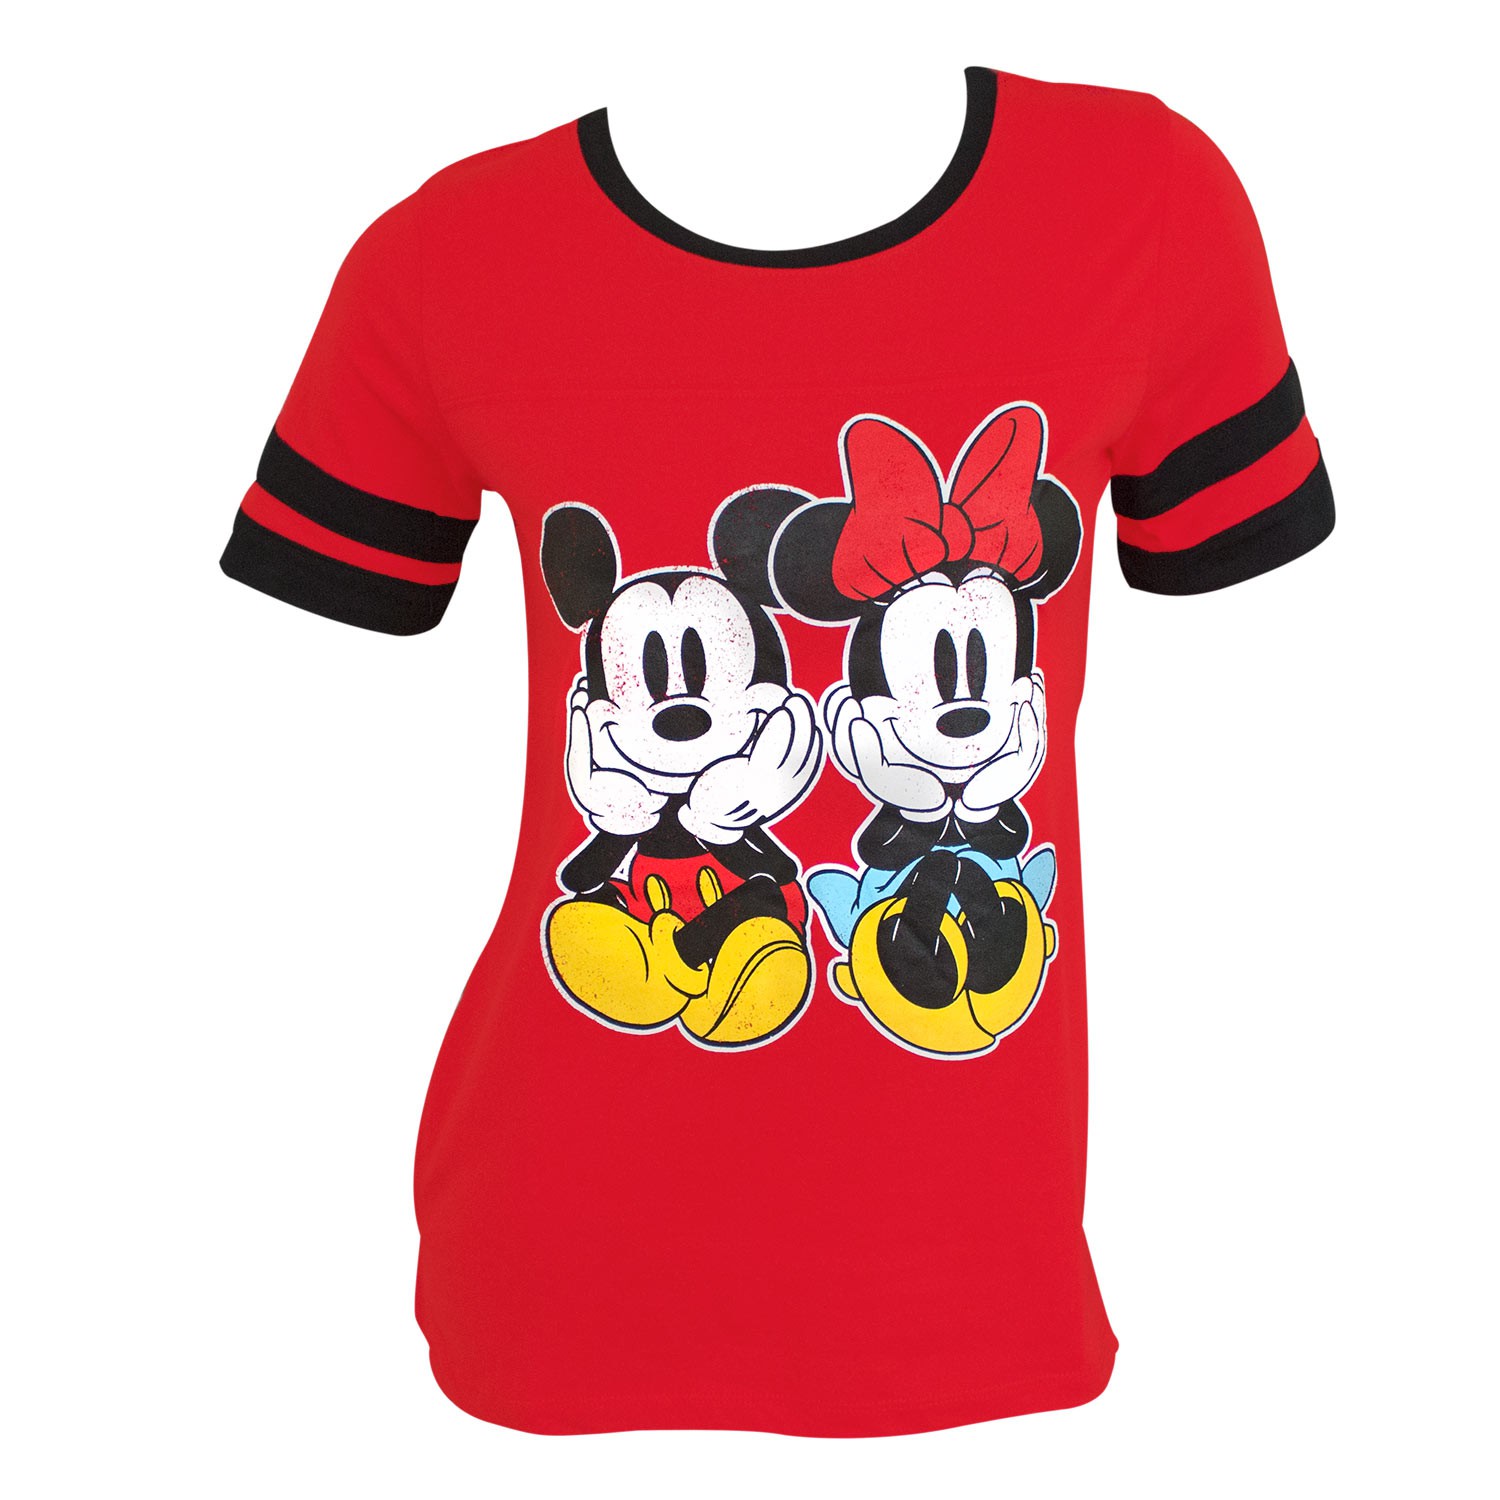 Mickey And Minnie Women's Red Jersey T-Shirt